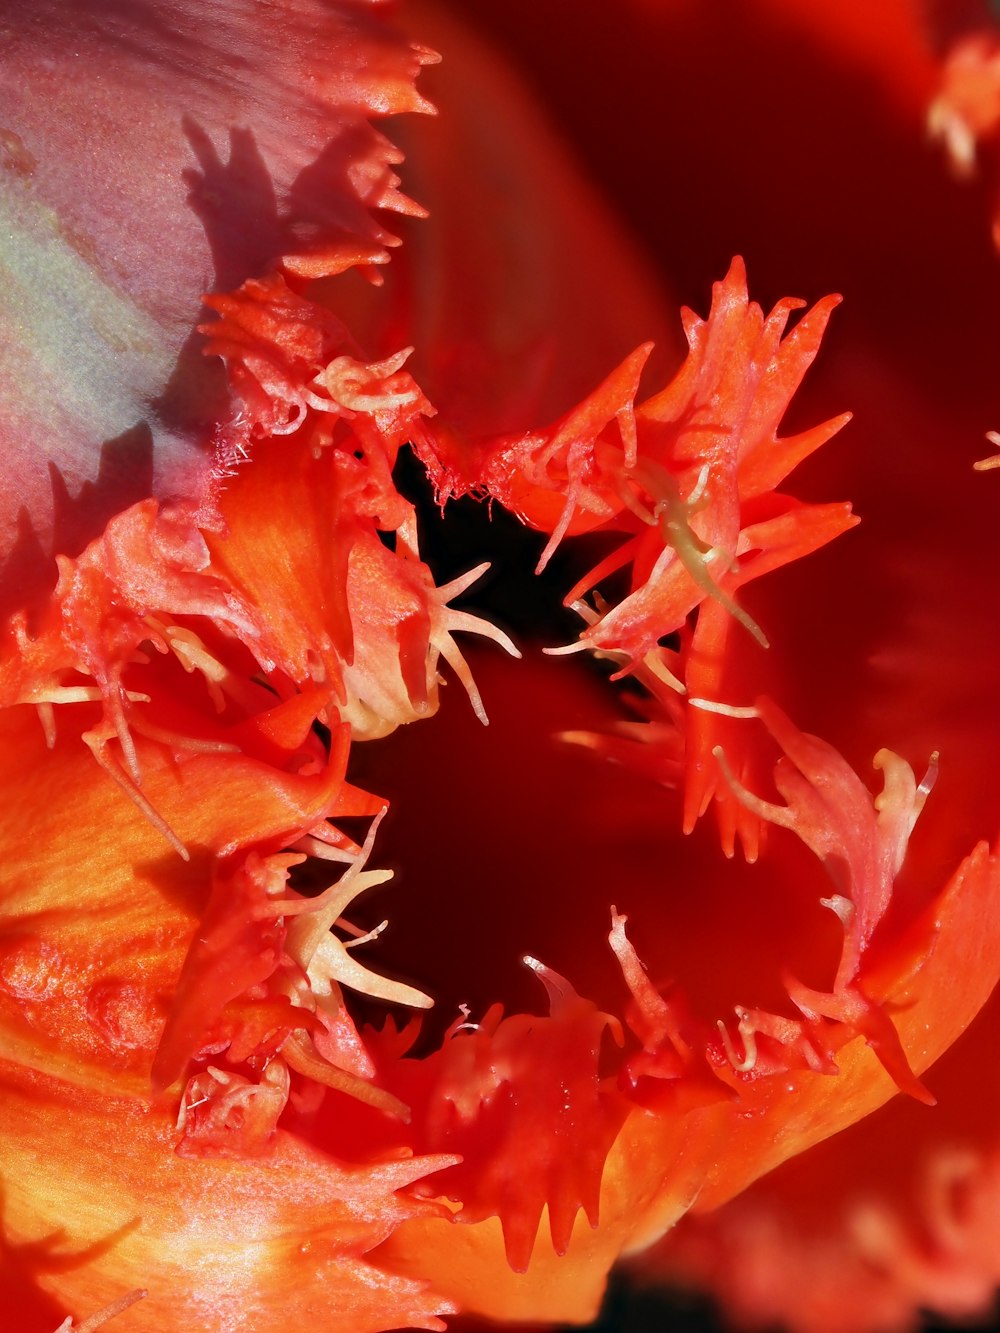 a close up of a red and orange flower